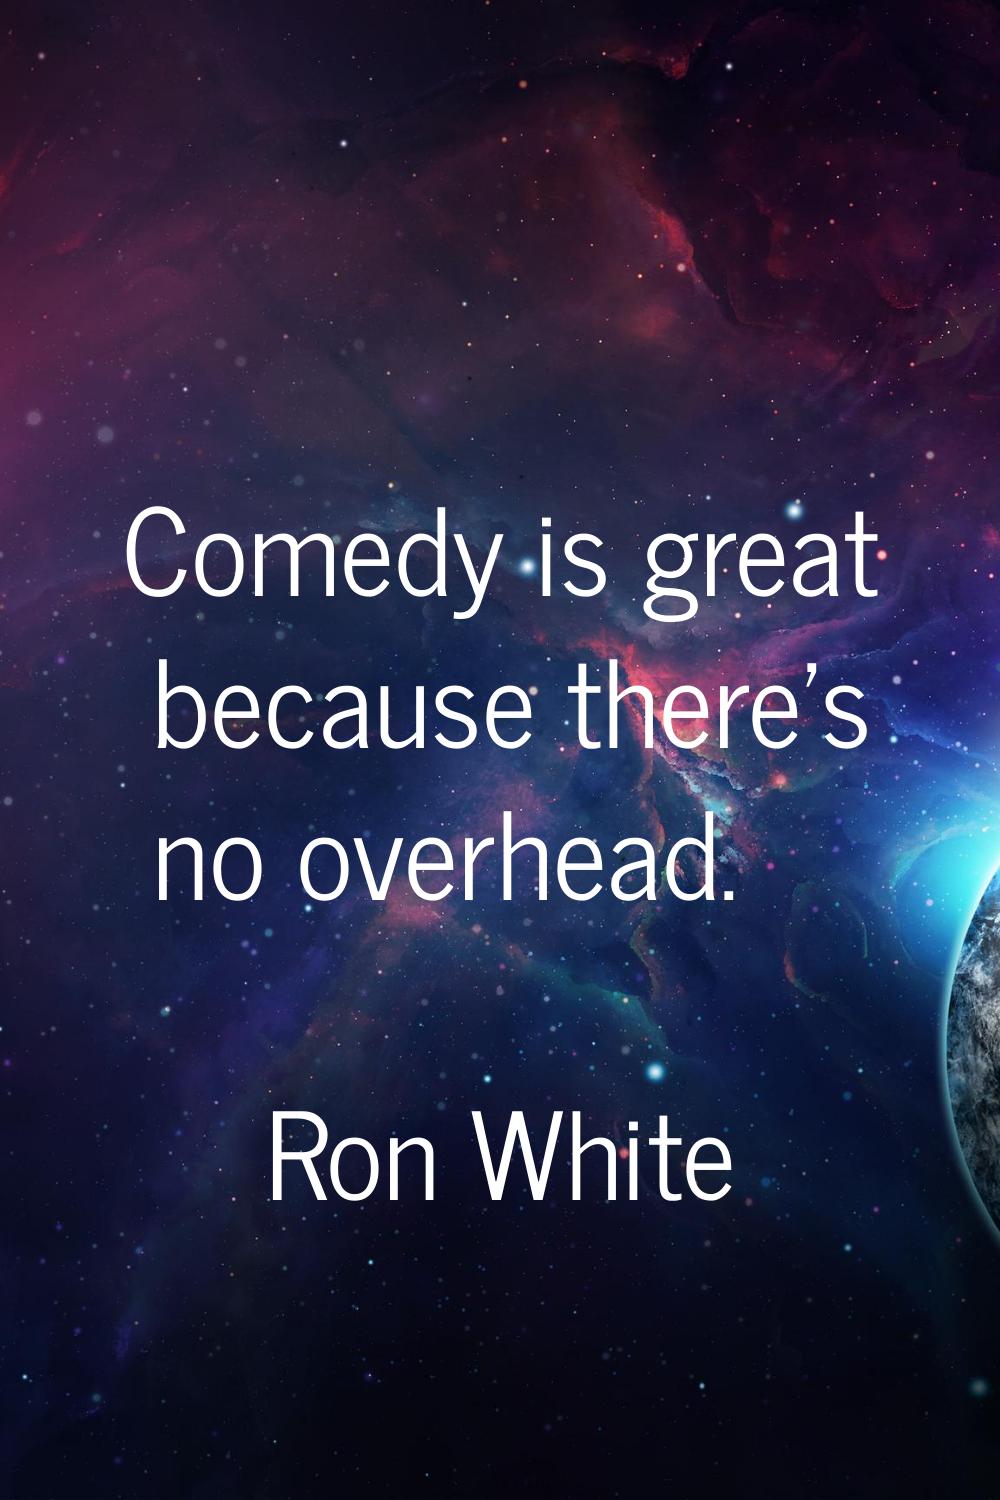 Comedy is great because there's no overhead.